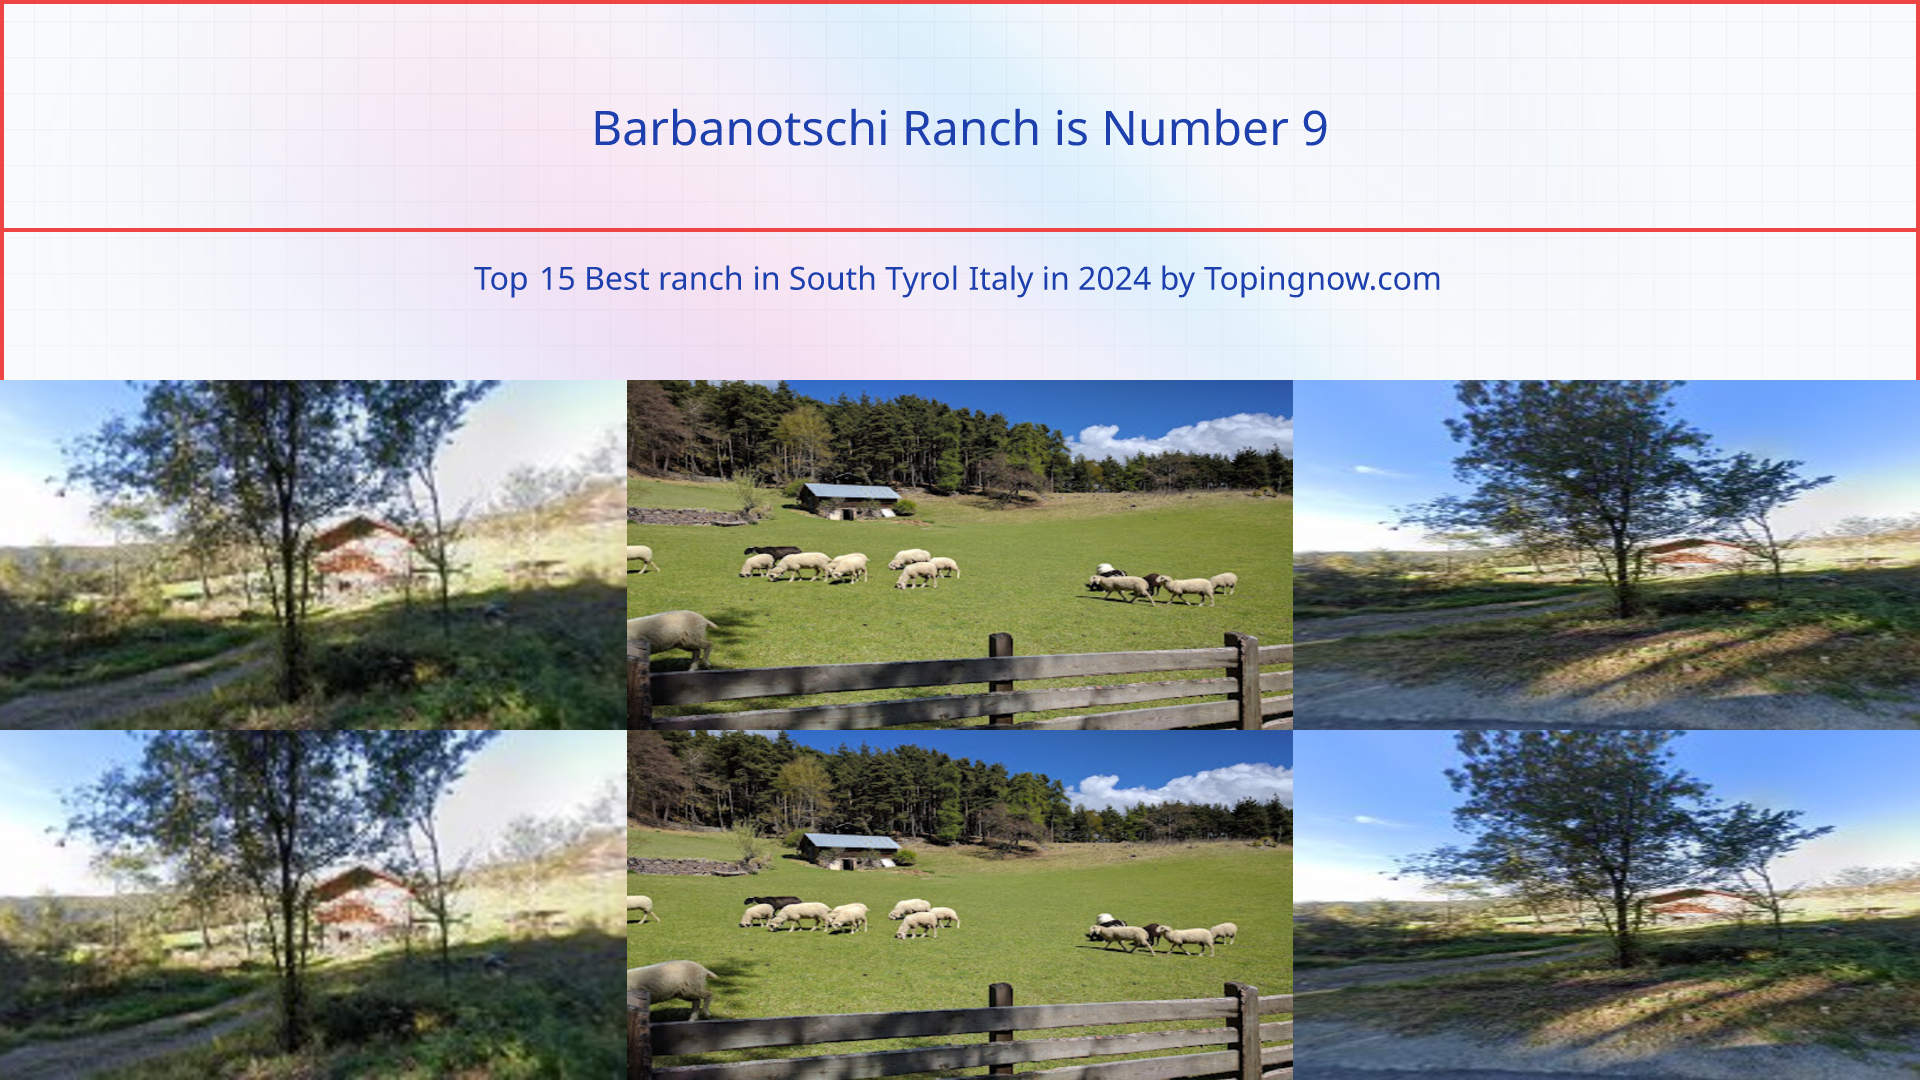 Barbanotschi Ranch: Top 15 Best ranch in South Tyrol Italy in 2024